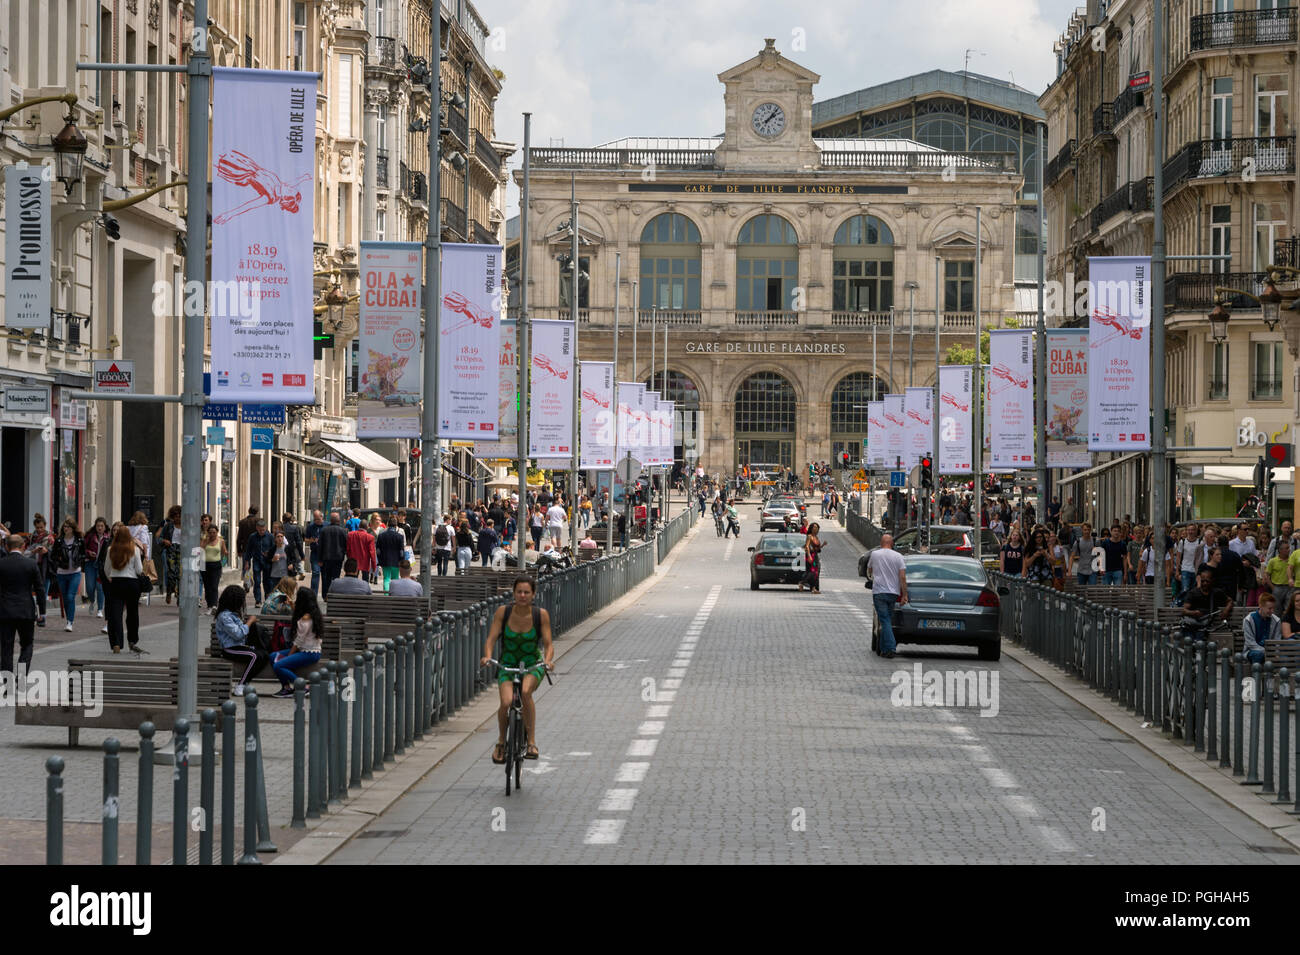 Lille, France - 15 June 2018: Traffic and people walking on Faidherbe street. Lille-Flandres railroad station the background. Stock Photo